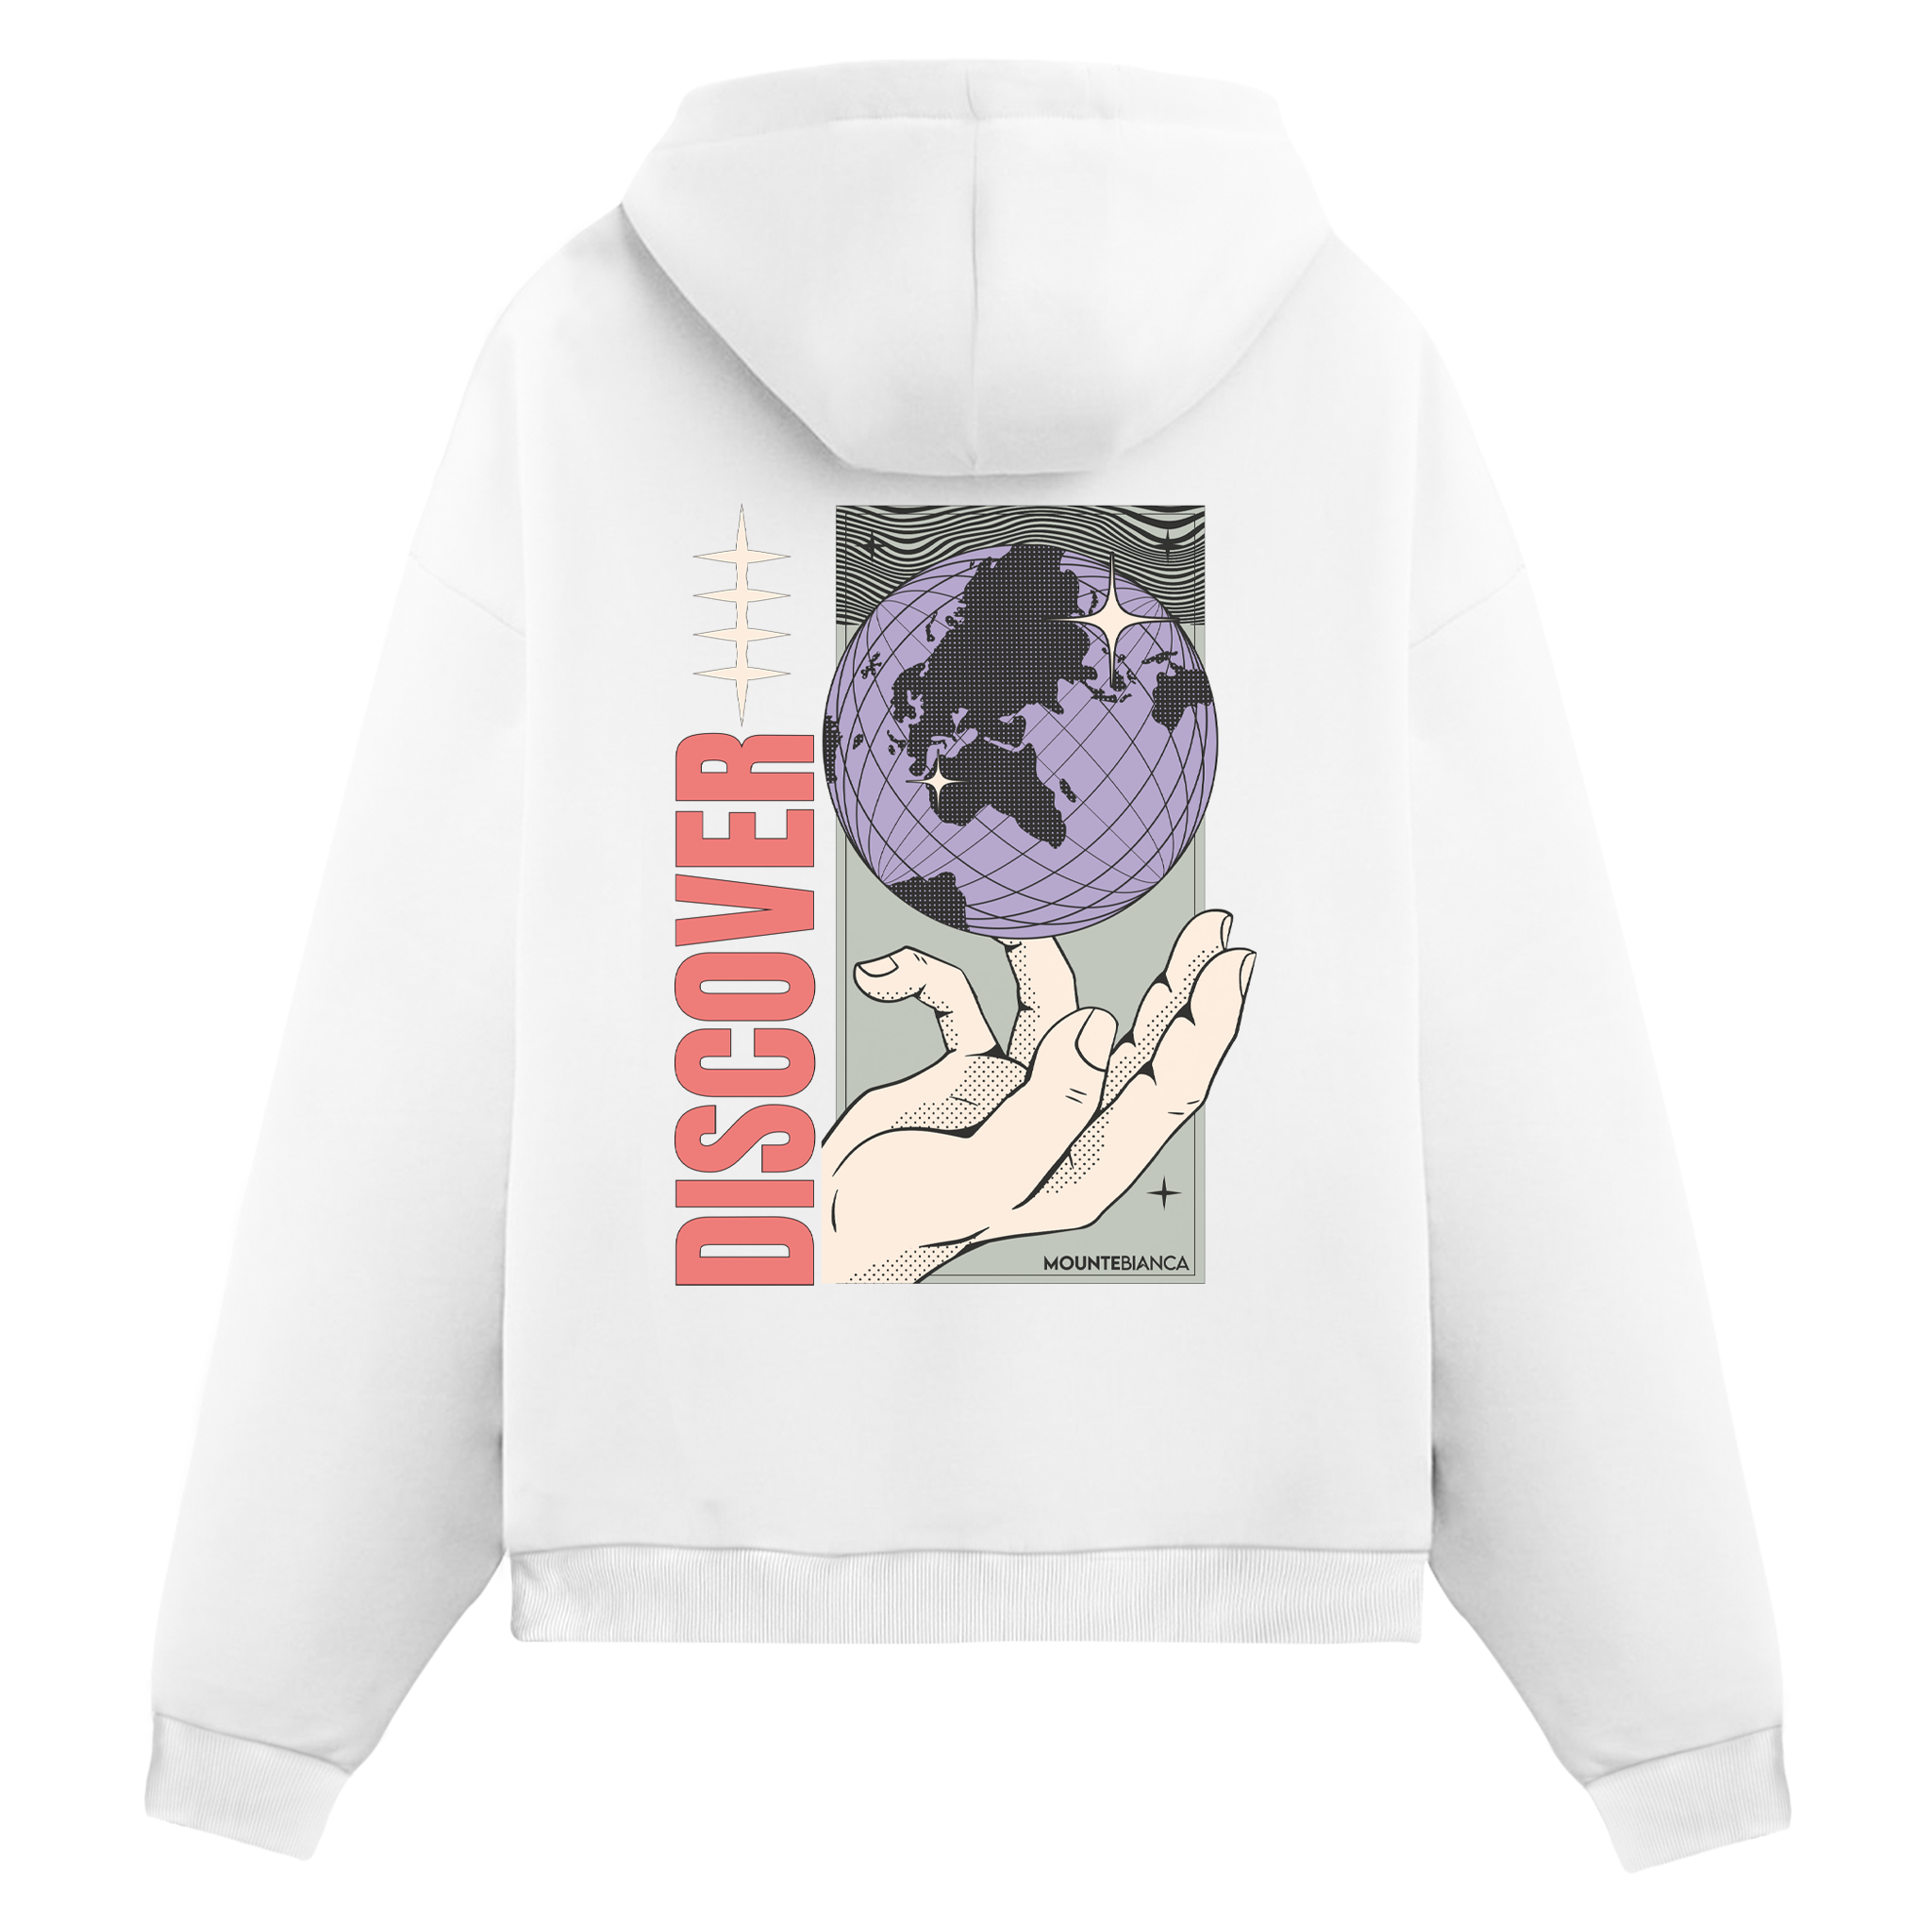 Discover - Hoodie